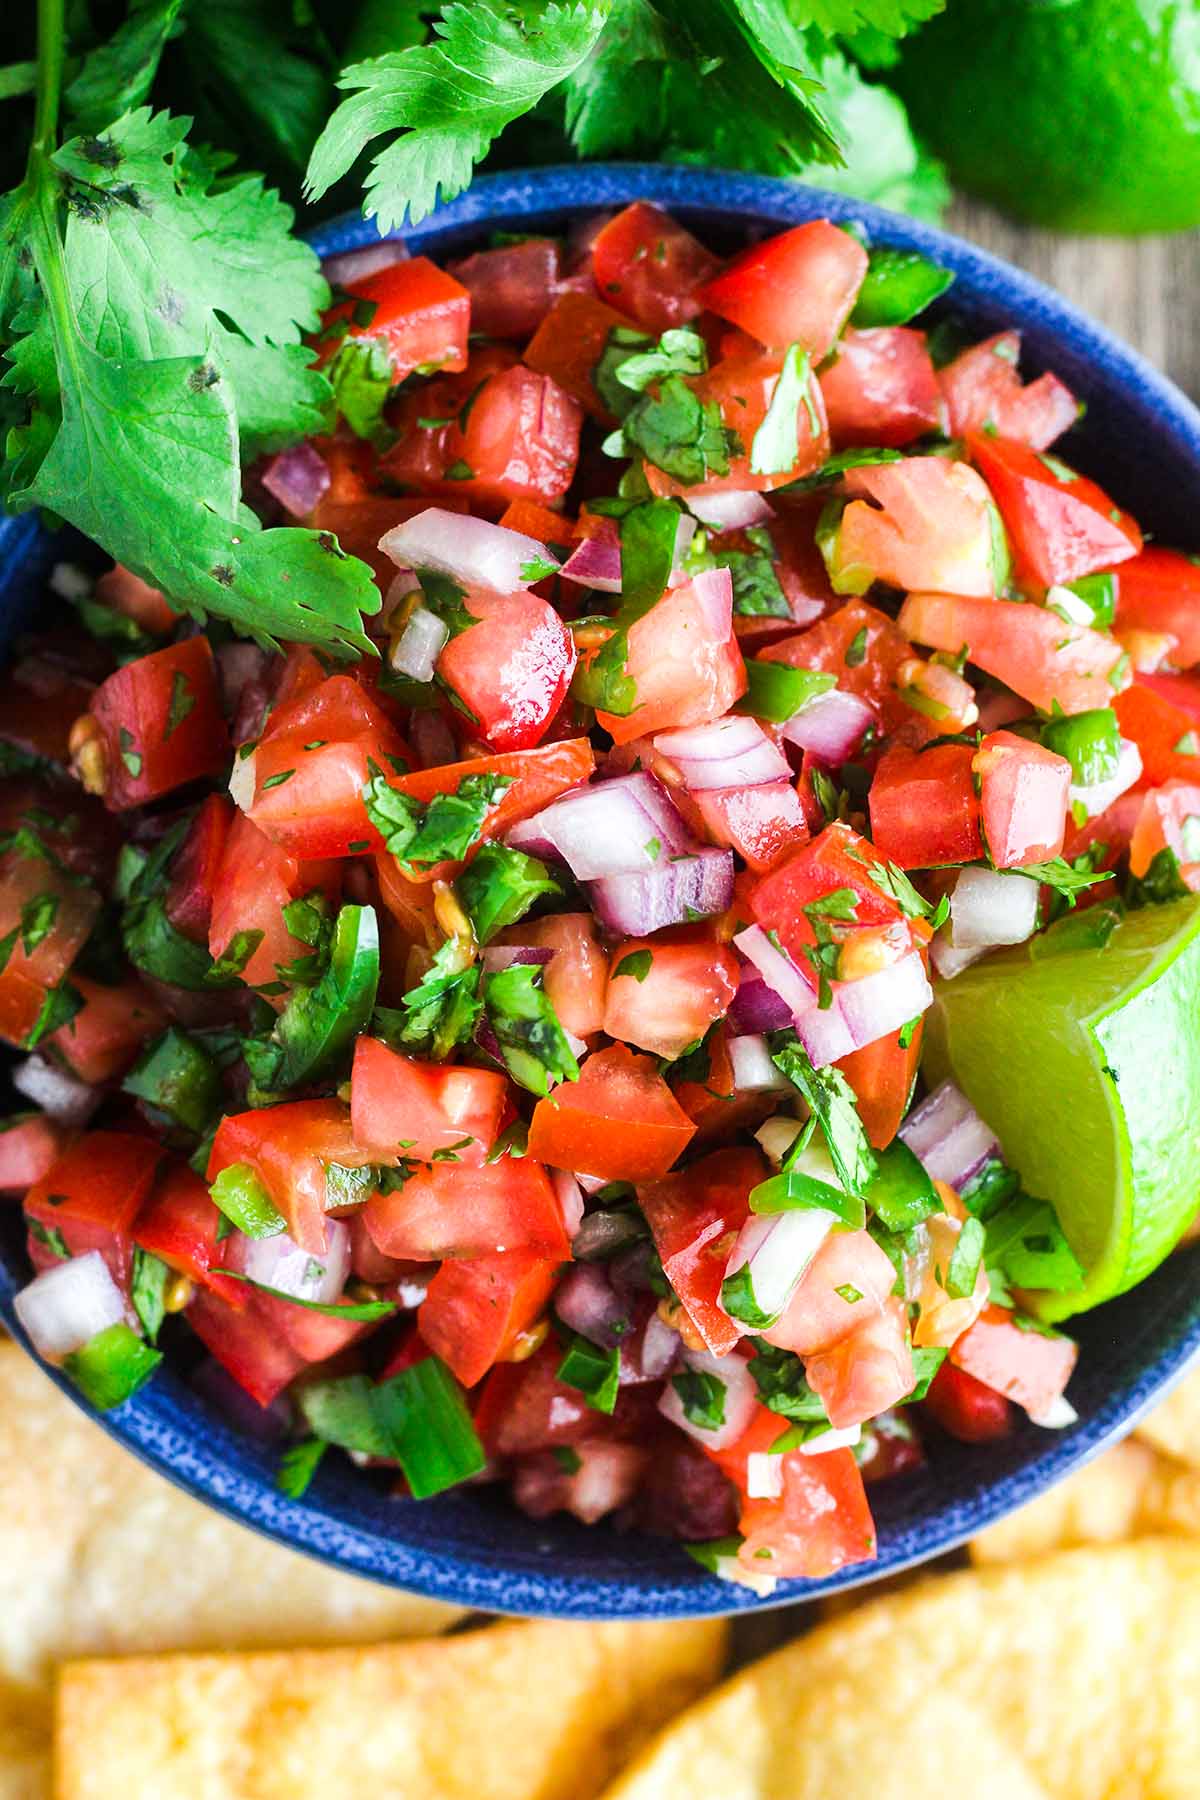 Bowl of salsa garnished with a lime wedge.